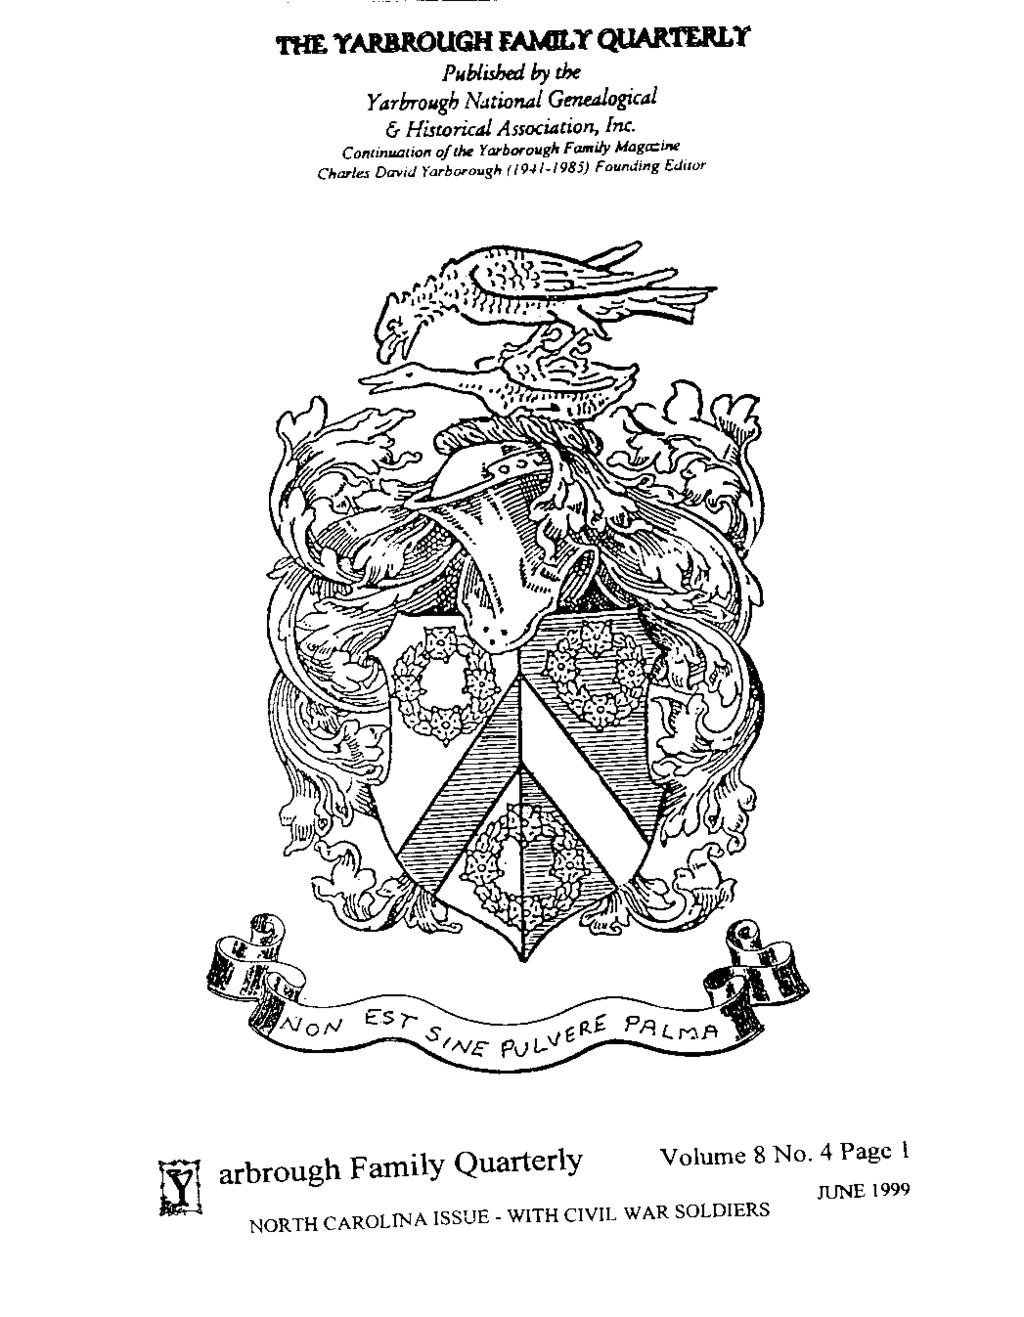 THE YARIUlOUGH FAMILY QUARTERLY Published by the Yarbrough National Genealogical & Historical Association, Inc.